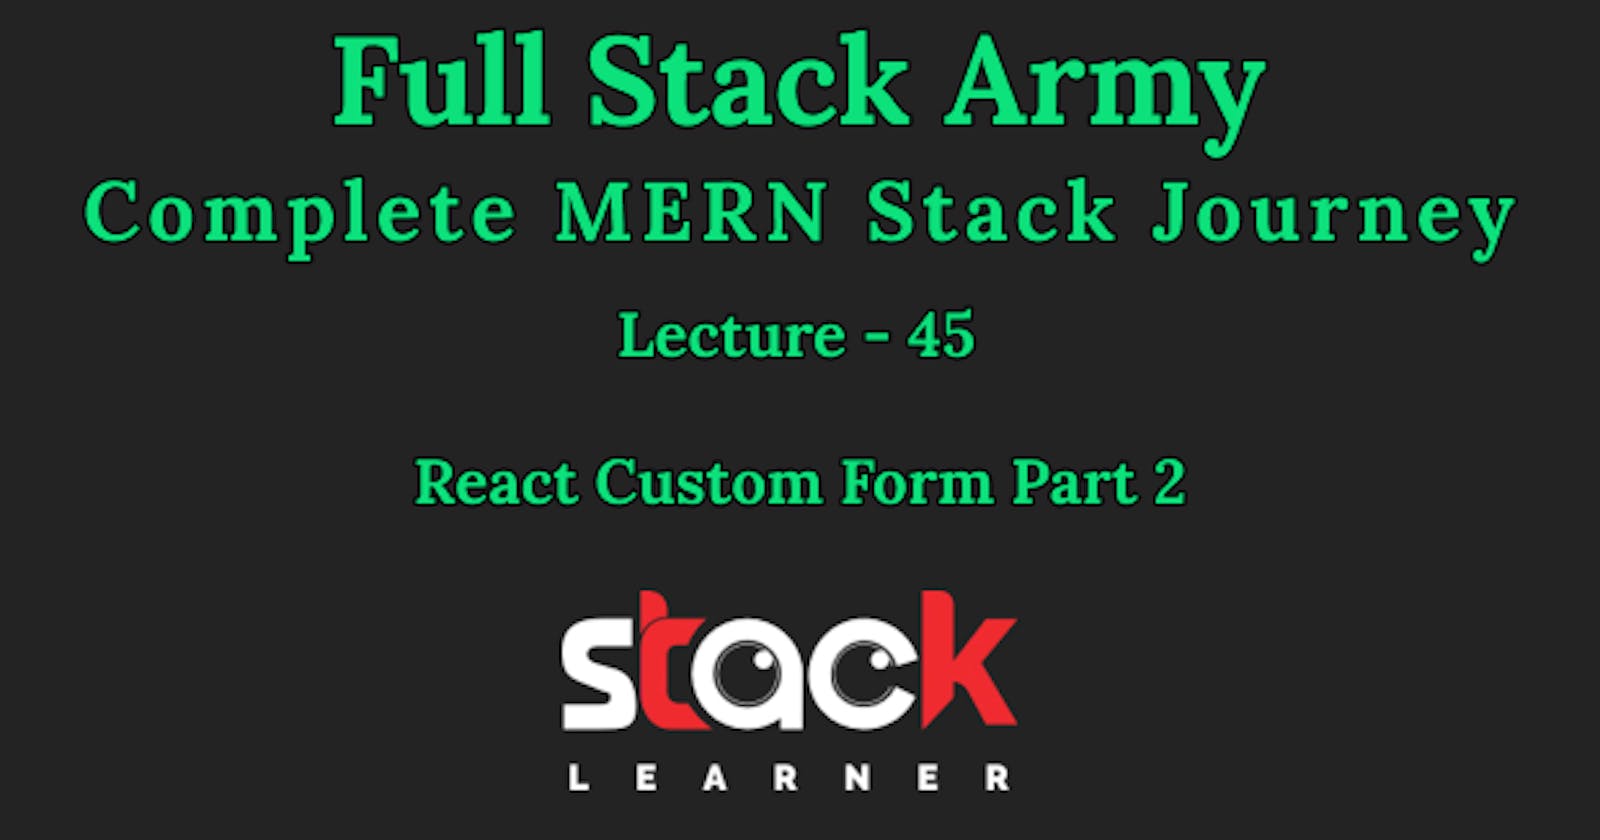 Lecture 45 - React Custom Form Part 2